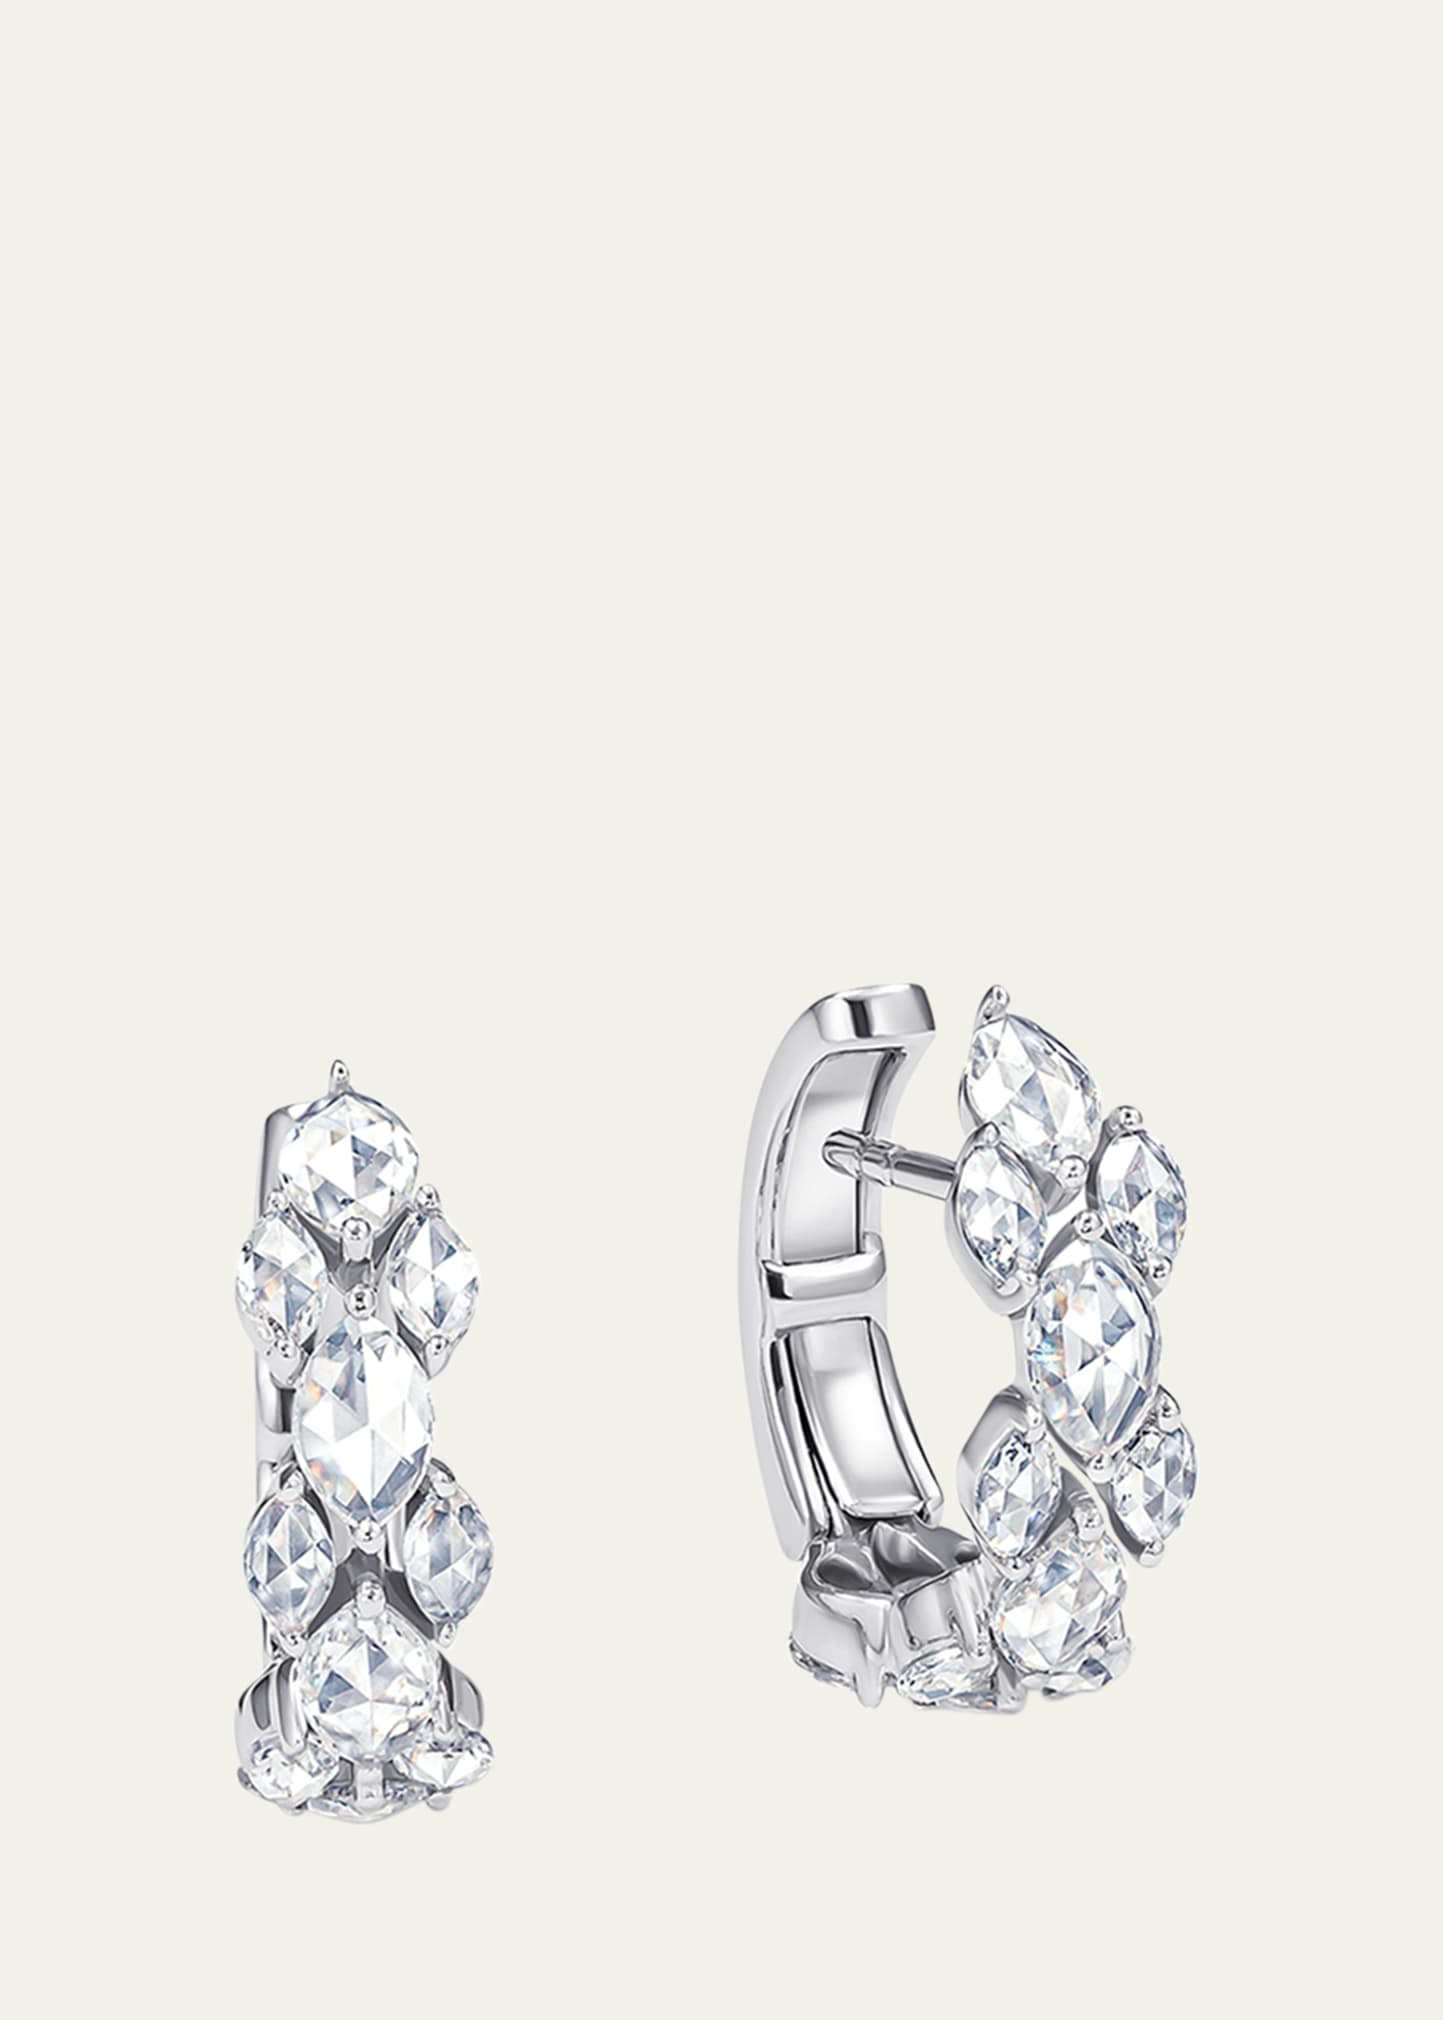 64 Facets 18k White Gold Huggie Earrings With Marquise Diamonds